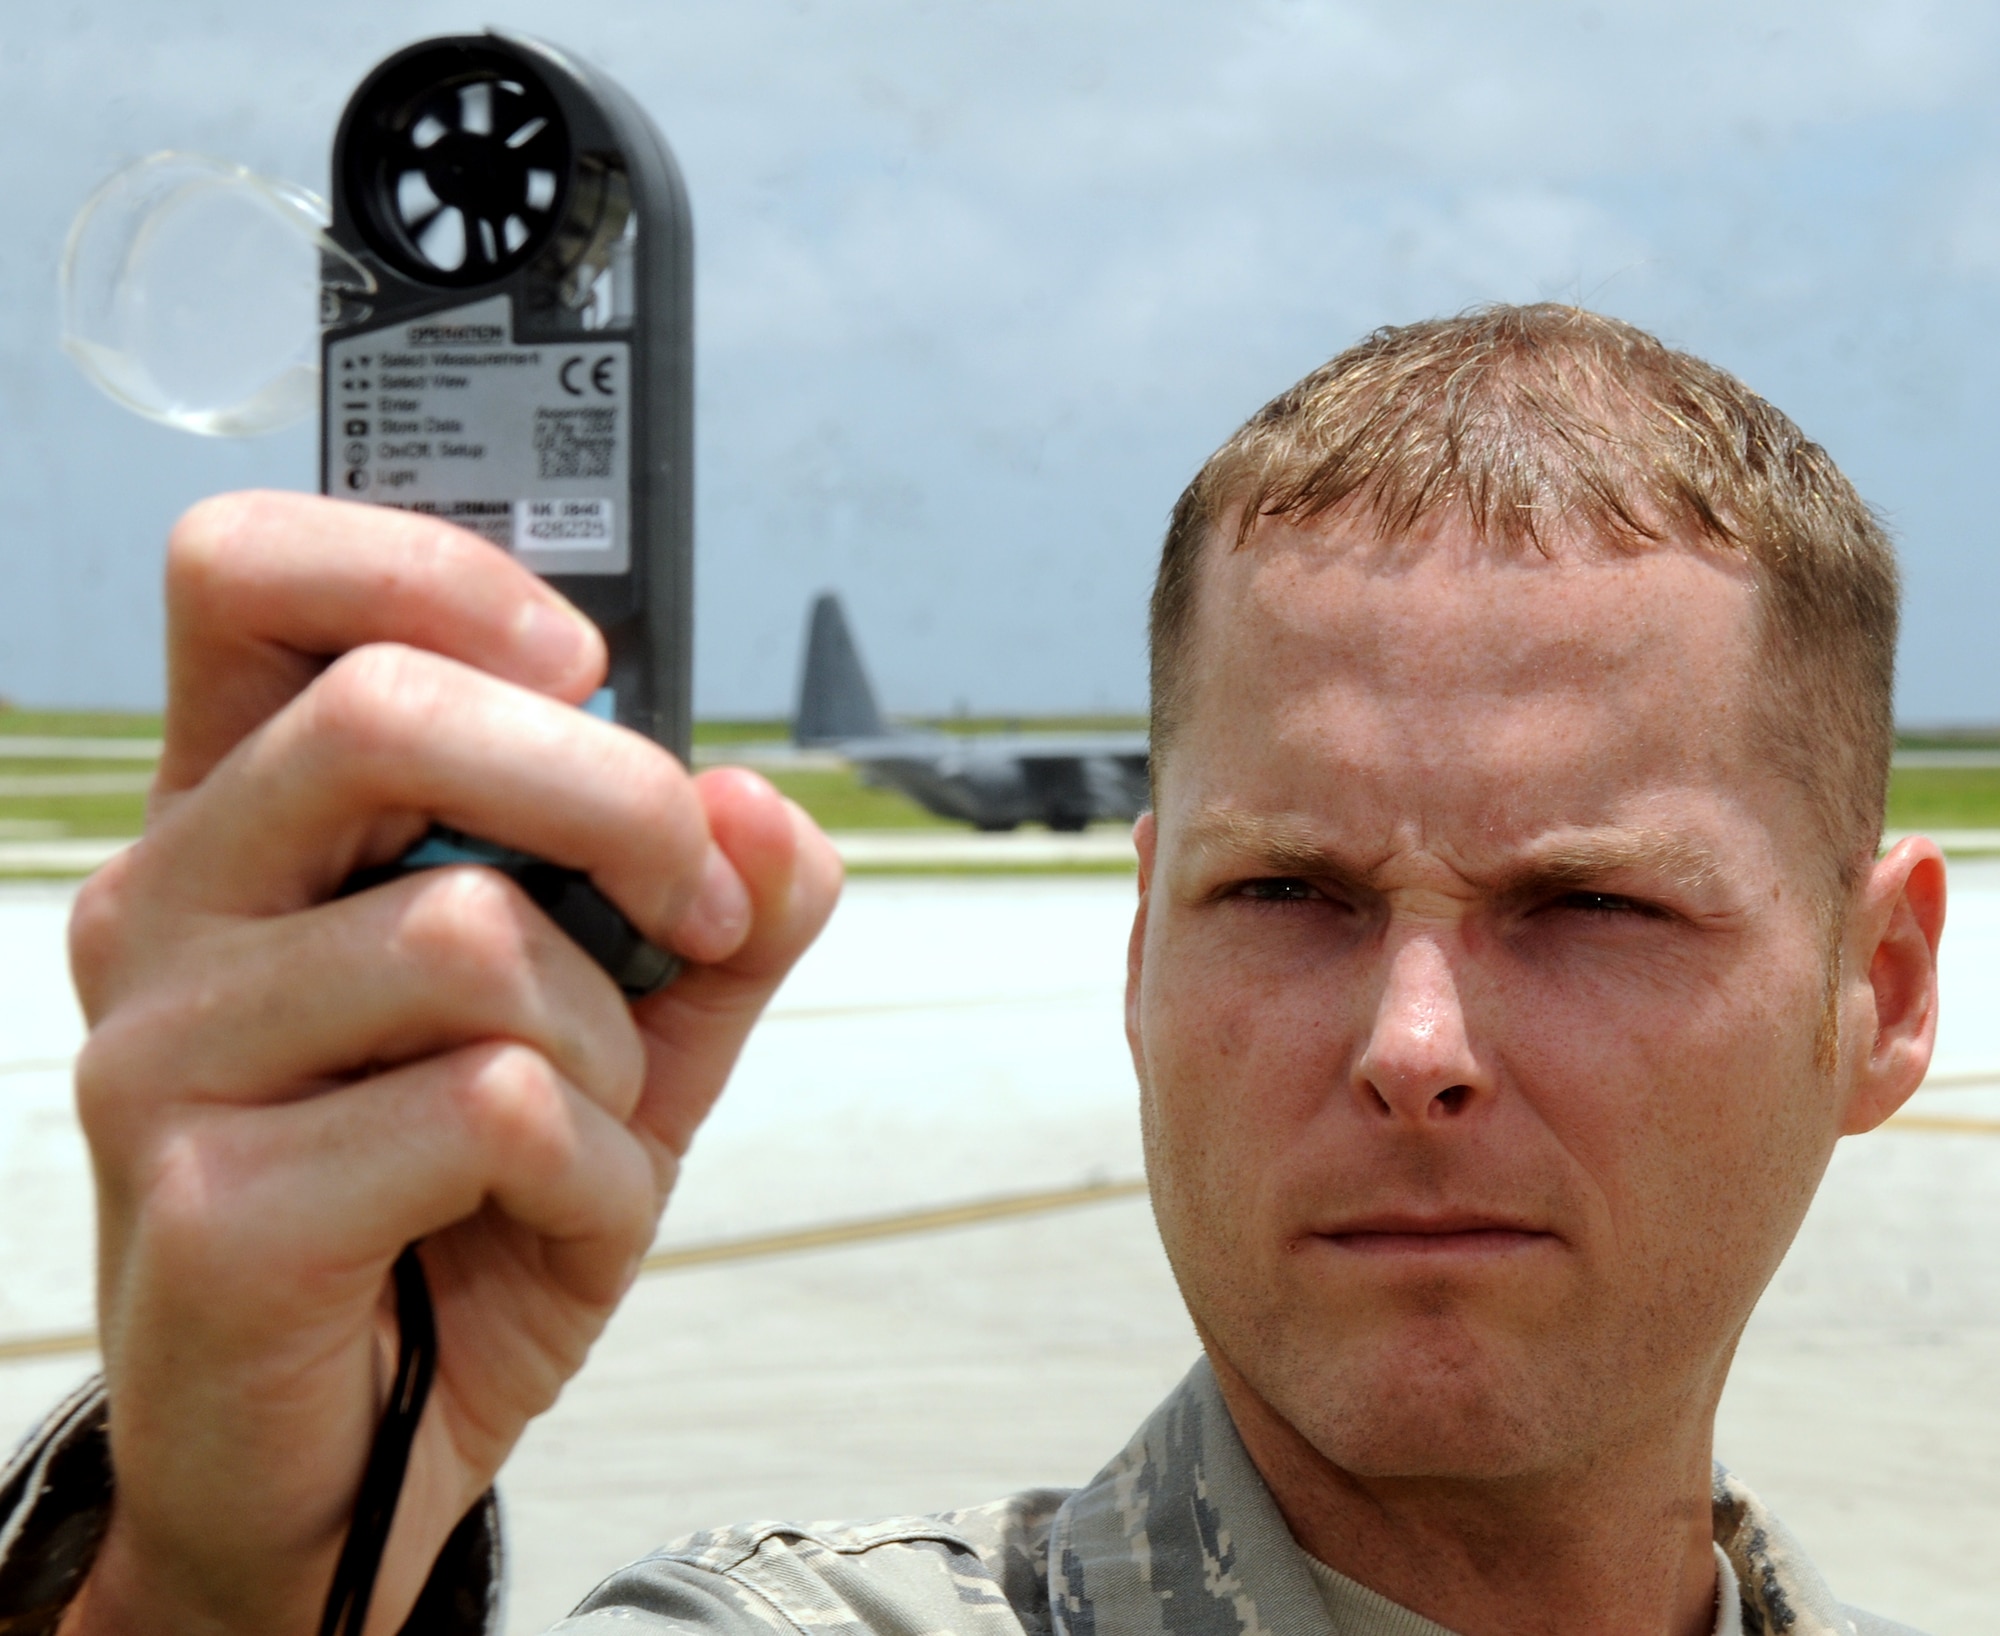 ANDERSEN AIR FORCE BASE, Guam - Staff Sgt. William Robinson, 36th Operations Support Squadron weather forecaster, checks wind speed, temperature and other weather conditions July 7. The 36th OSS weather flight provides weather products and knowledge to expeditionary flying squadrons, wing staff, transient aircrews and flight line operations. They ensure the local populace has the information they need to react to any weather conditions. (U.S. Air Force photo/ Airman 1st Class Anthony Jennings)